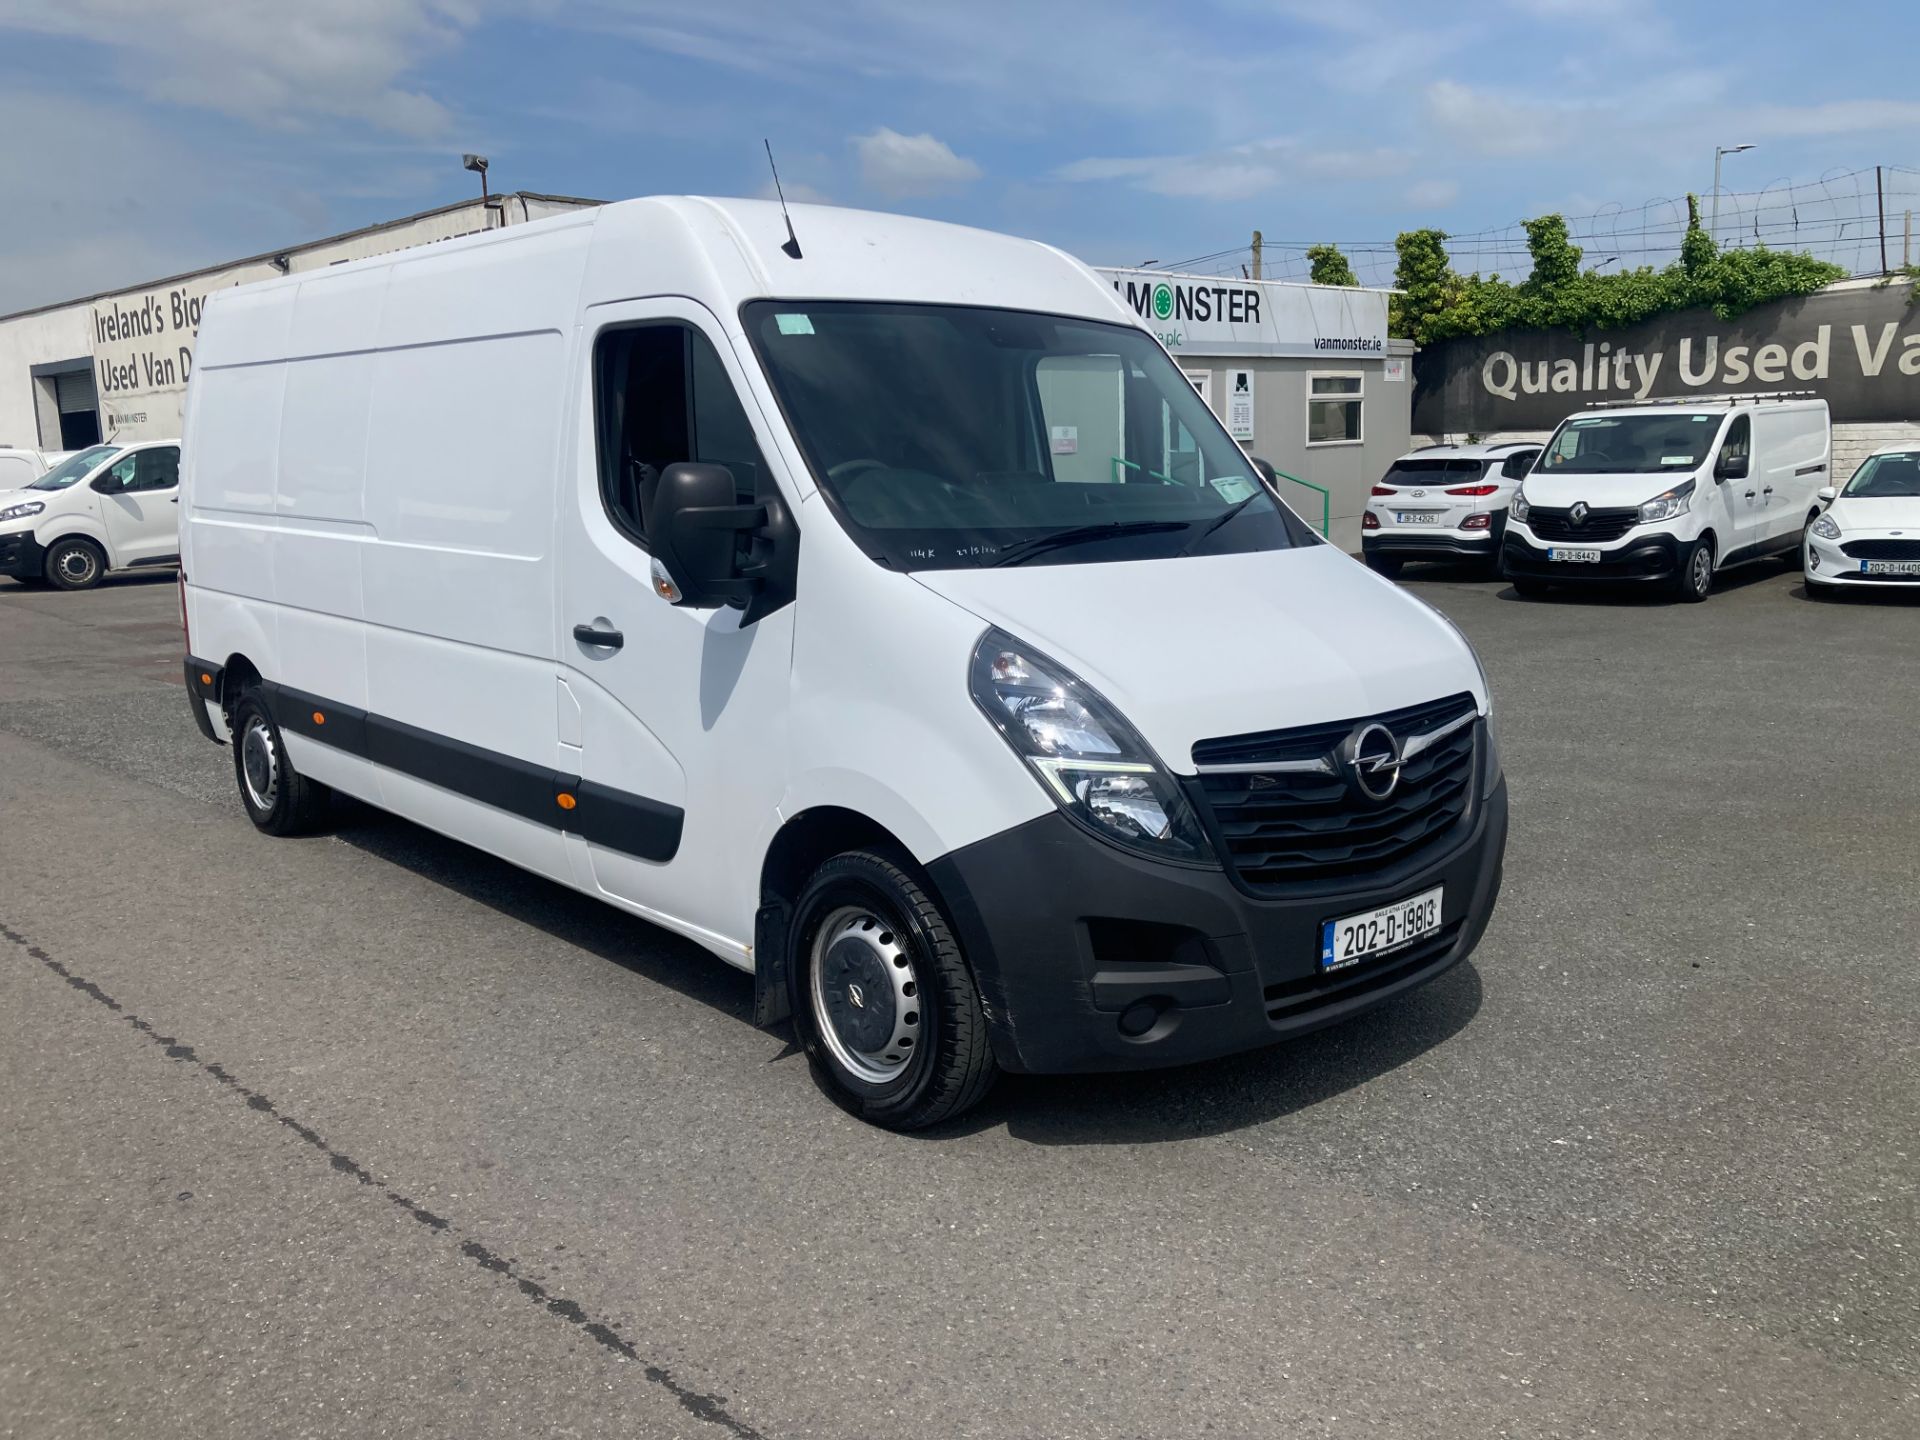 2020 Opel Movano My21-l3h2 Fwd3.5t-2.3 135 5DR (202D19813)